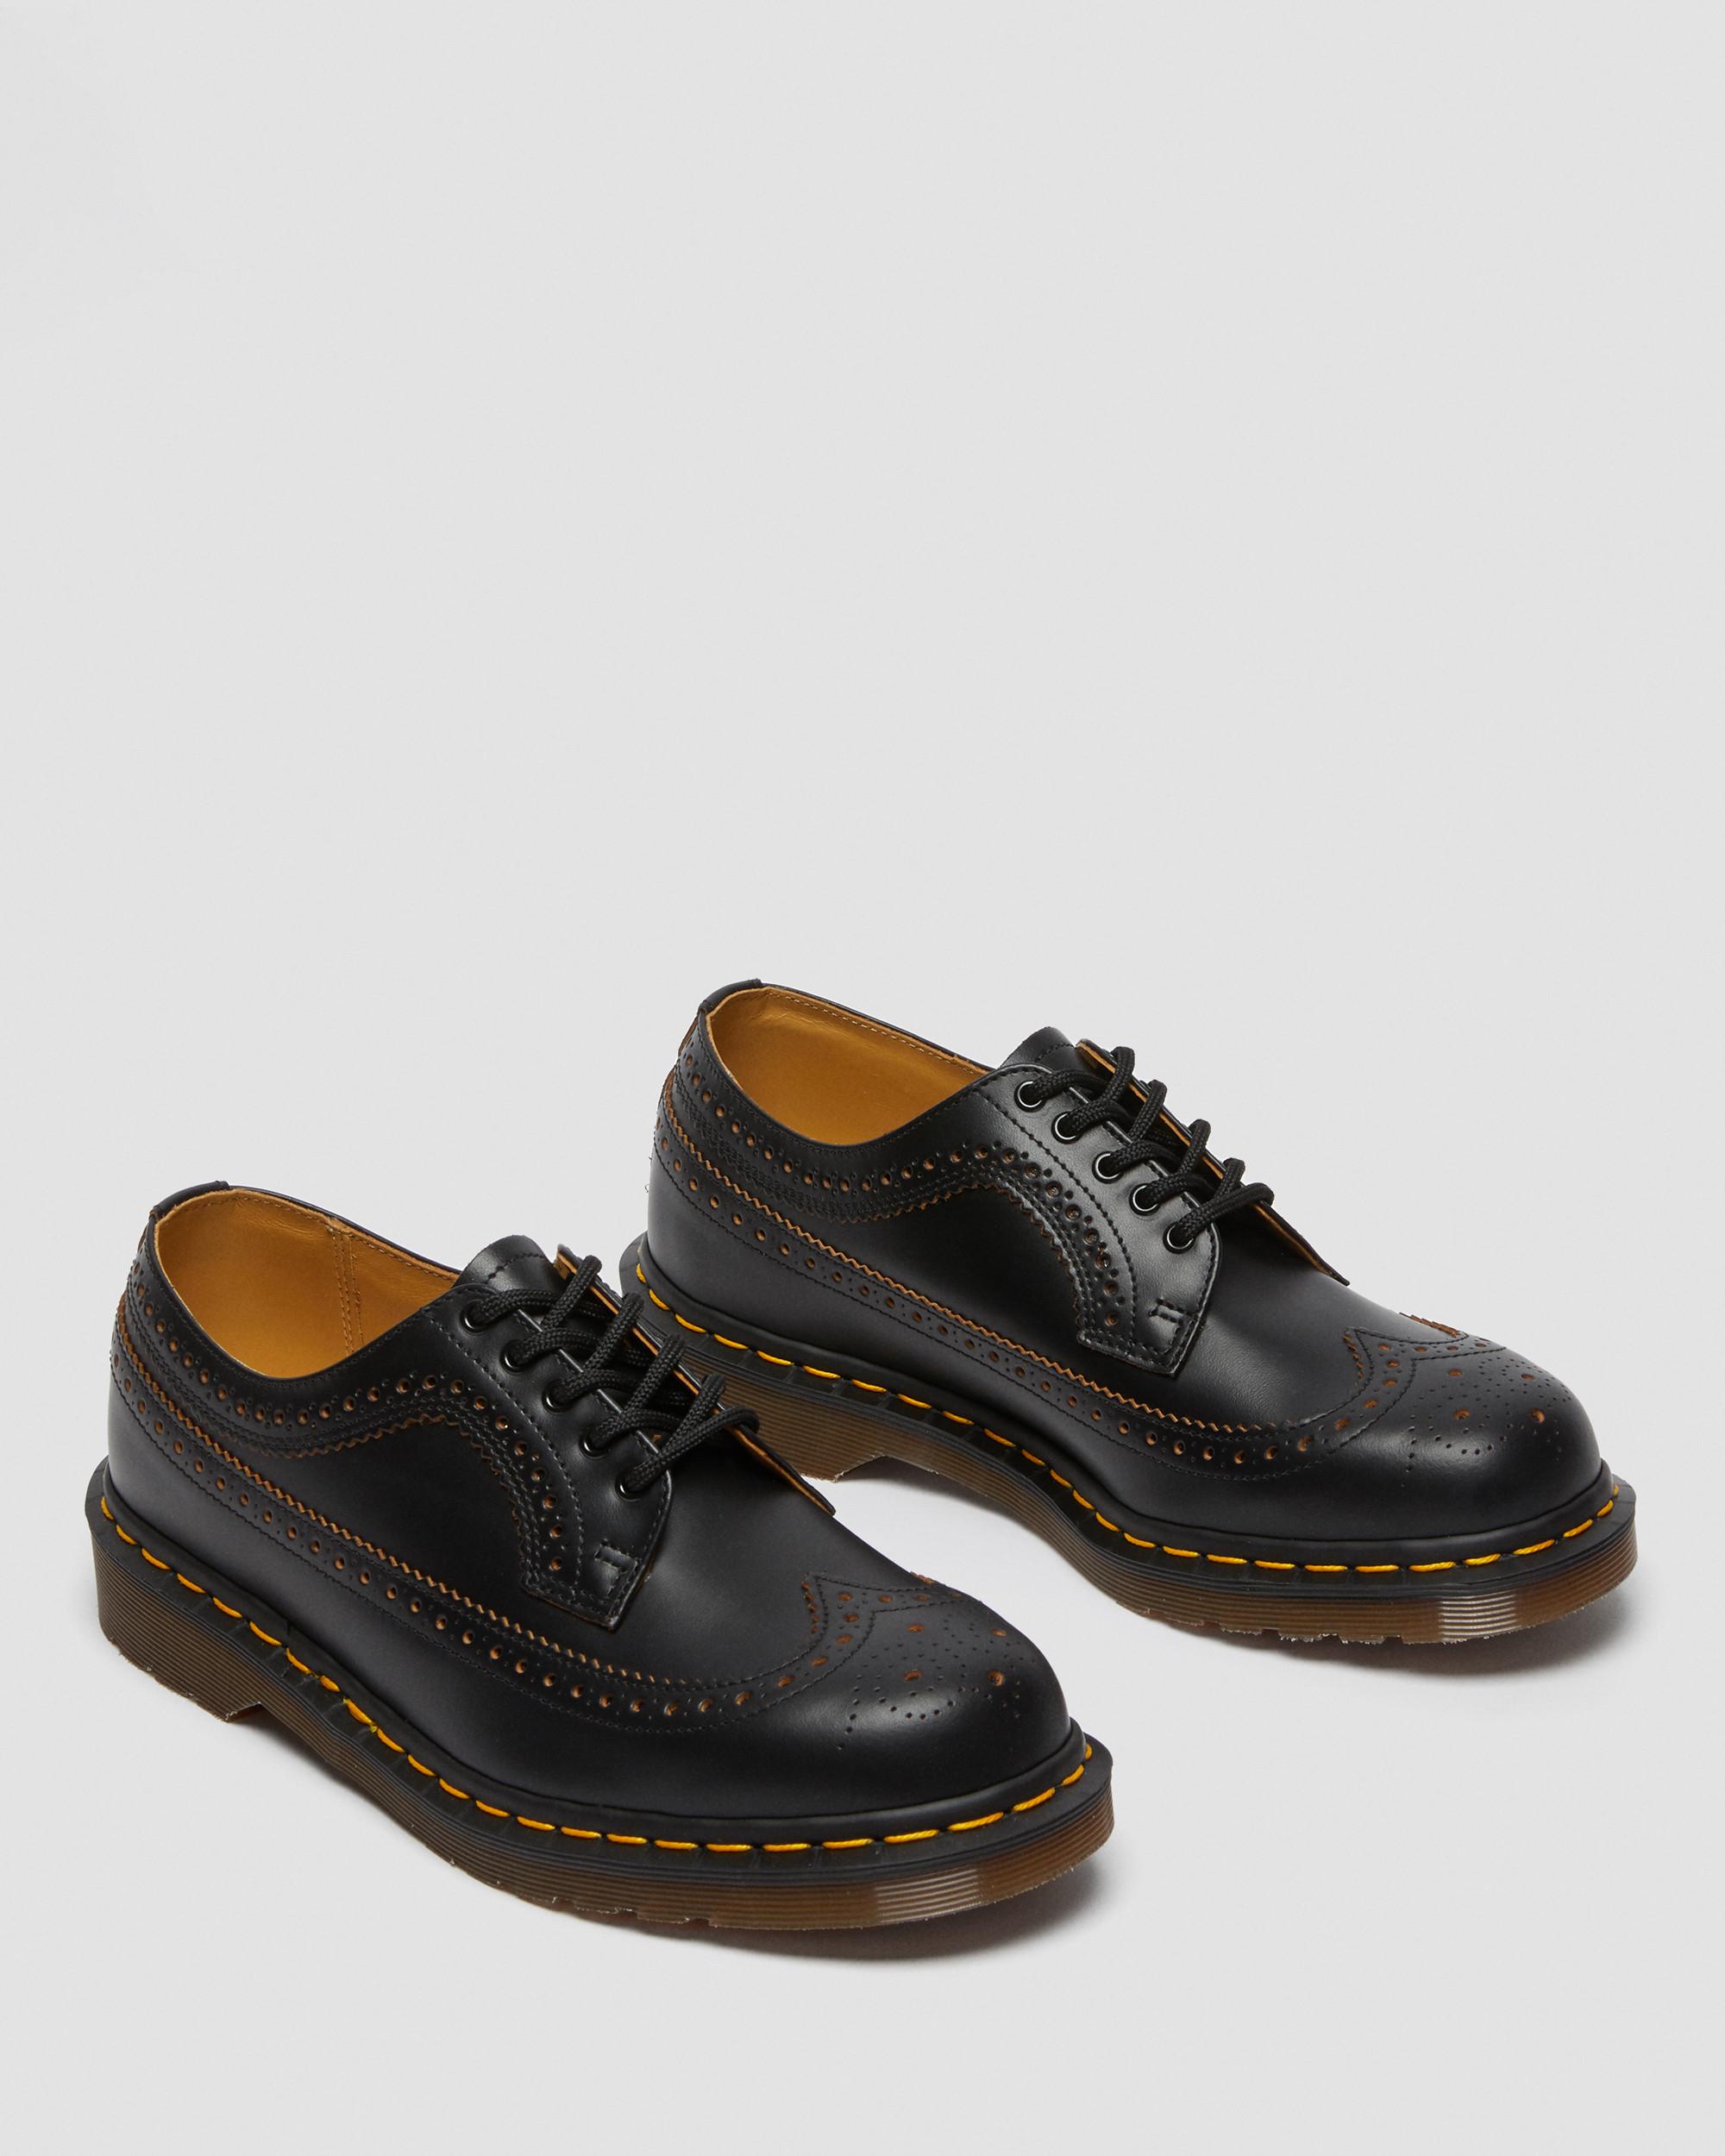 3989 VINTAGE MADE IN ENGLAND BROGUE SHOES | Dr. Martens Official